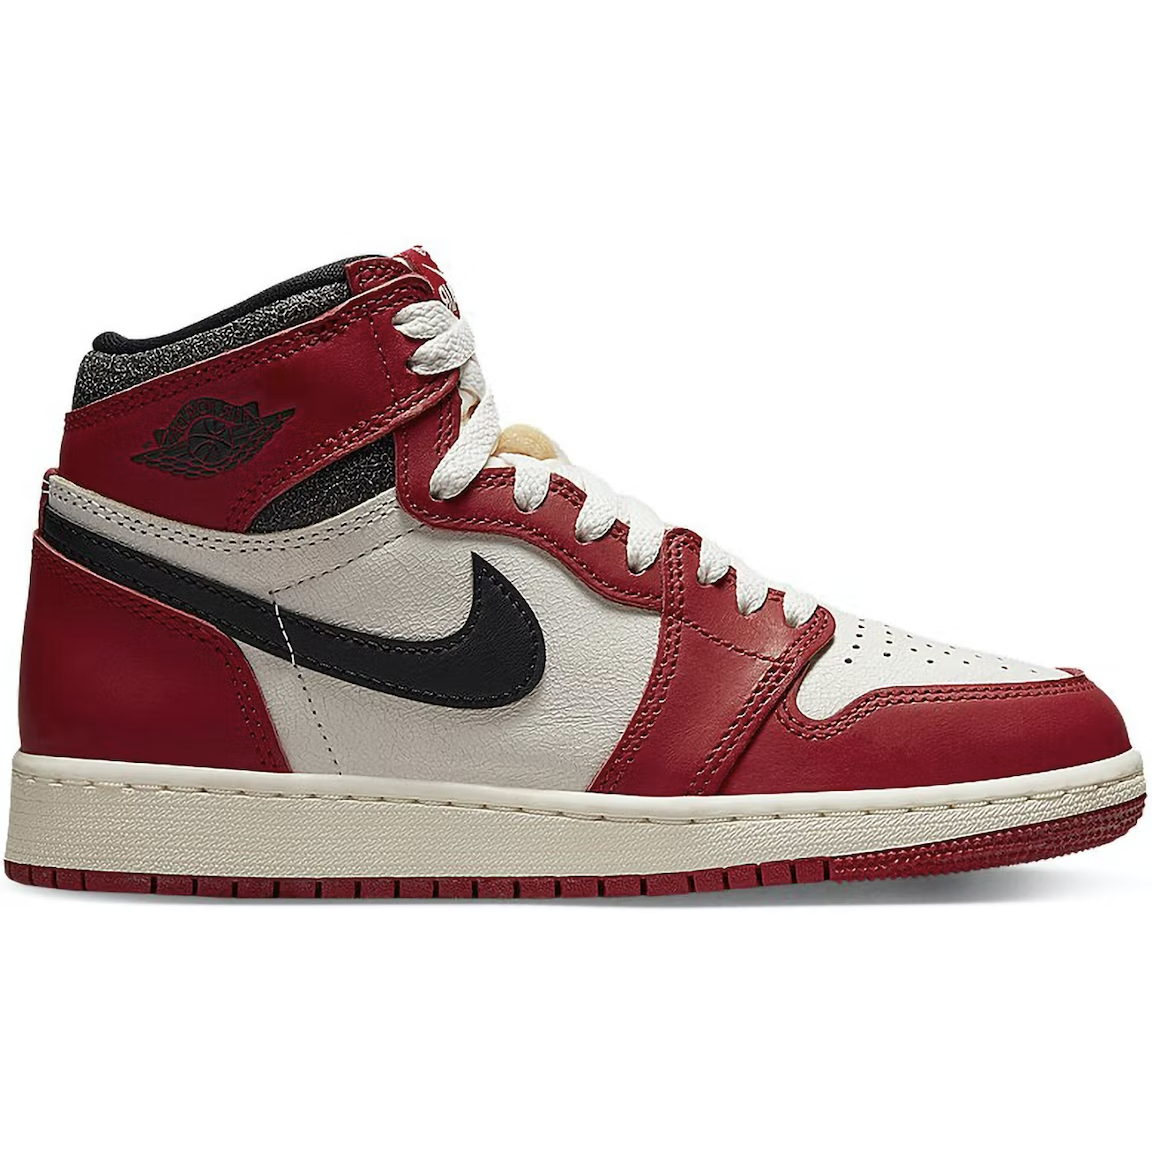 Jordan 1 Retro High OG - Chicago Lost and Found (GS)